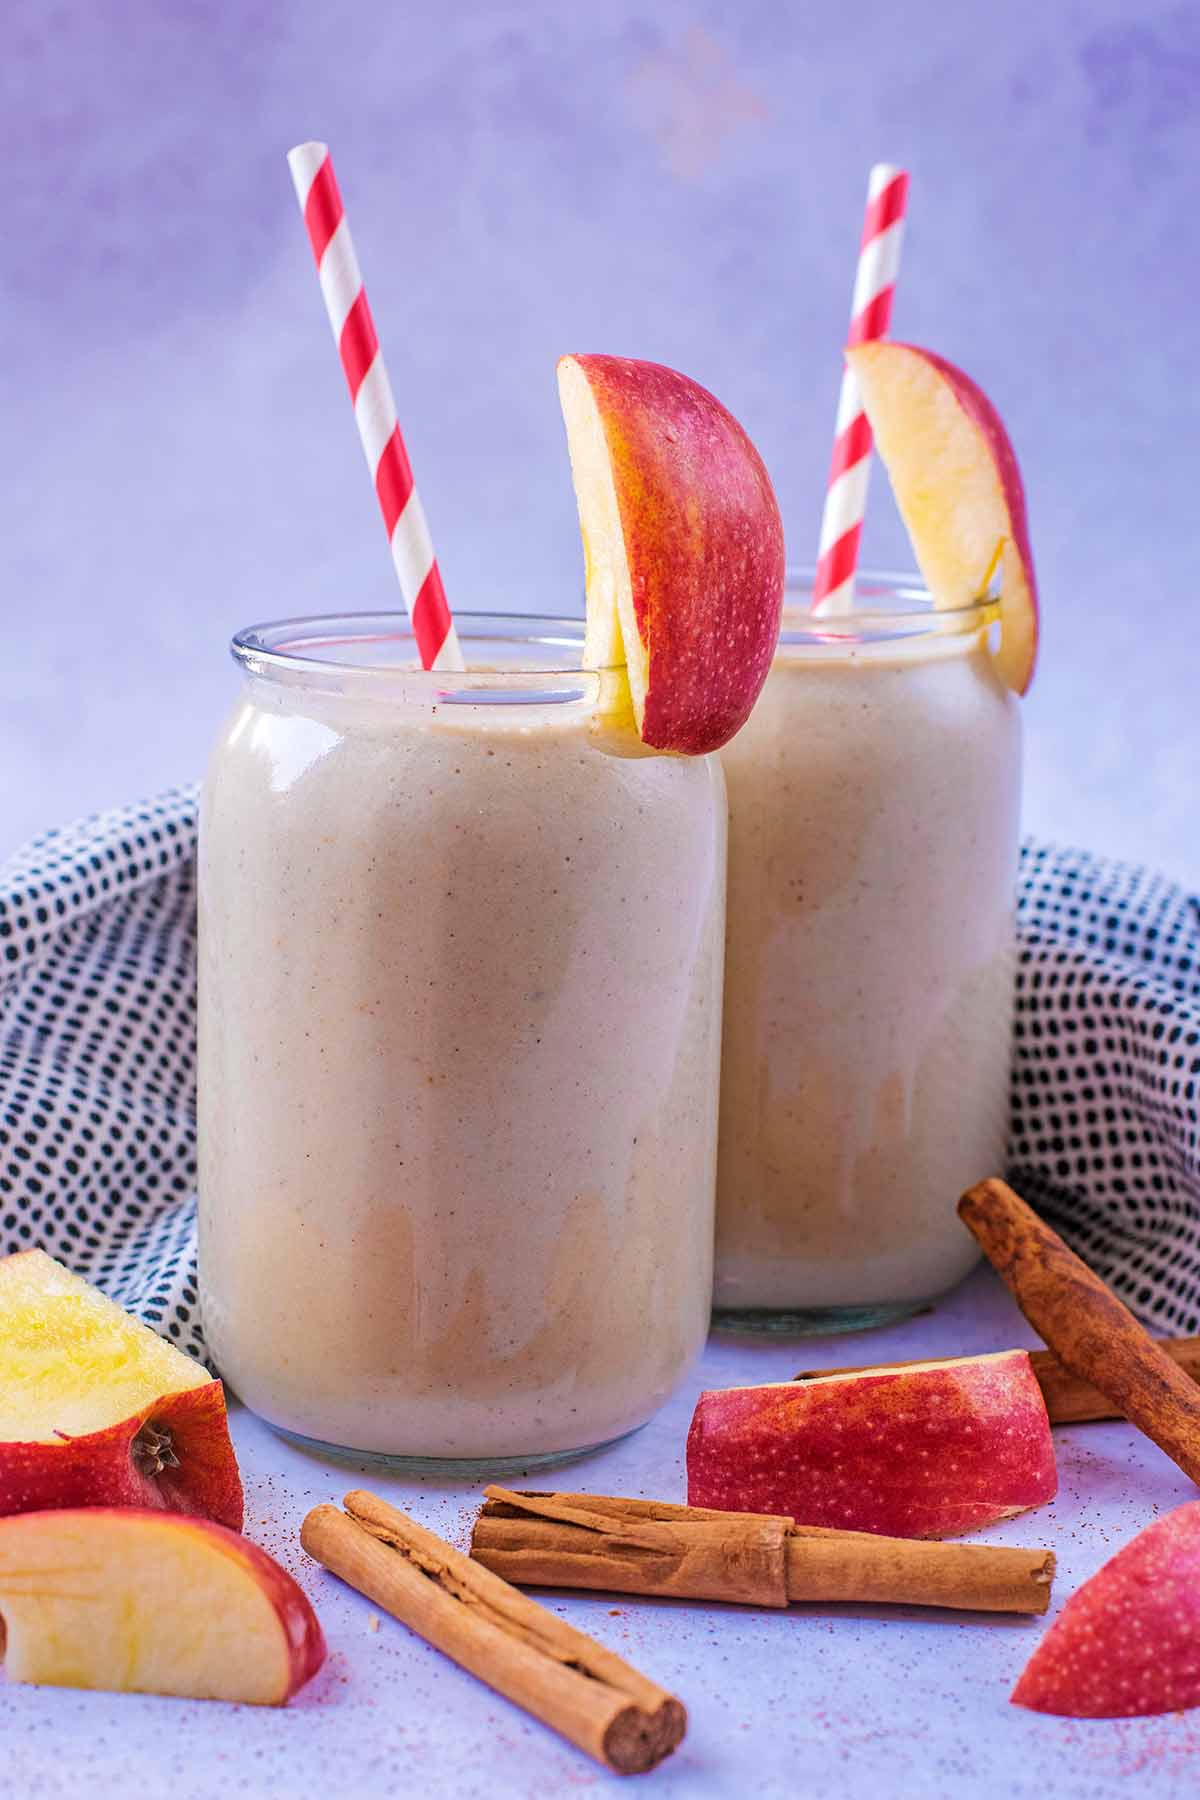 Two jars of smoothie with apple wedges on the rims.